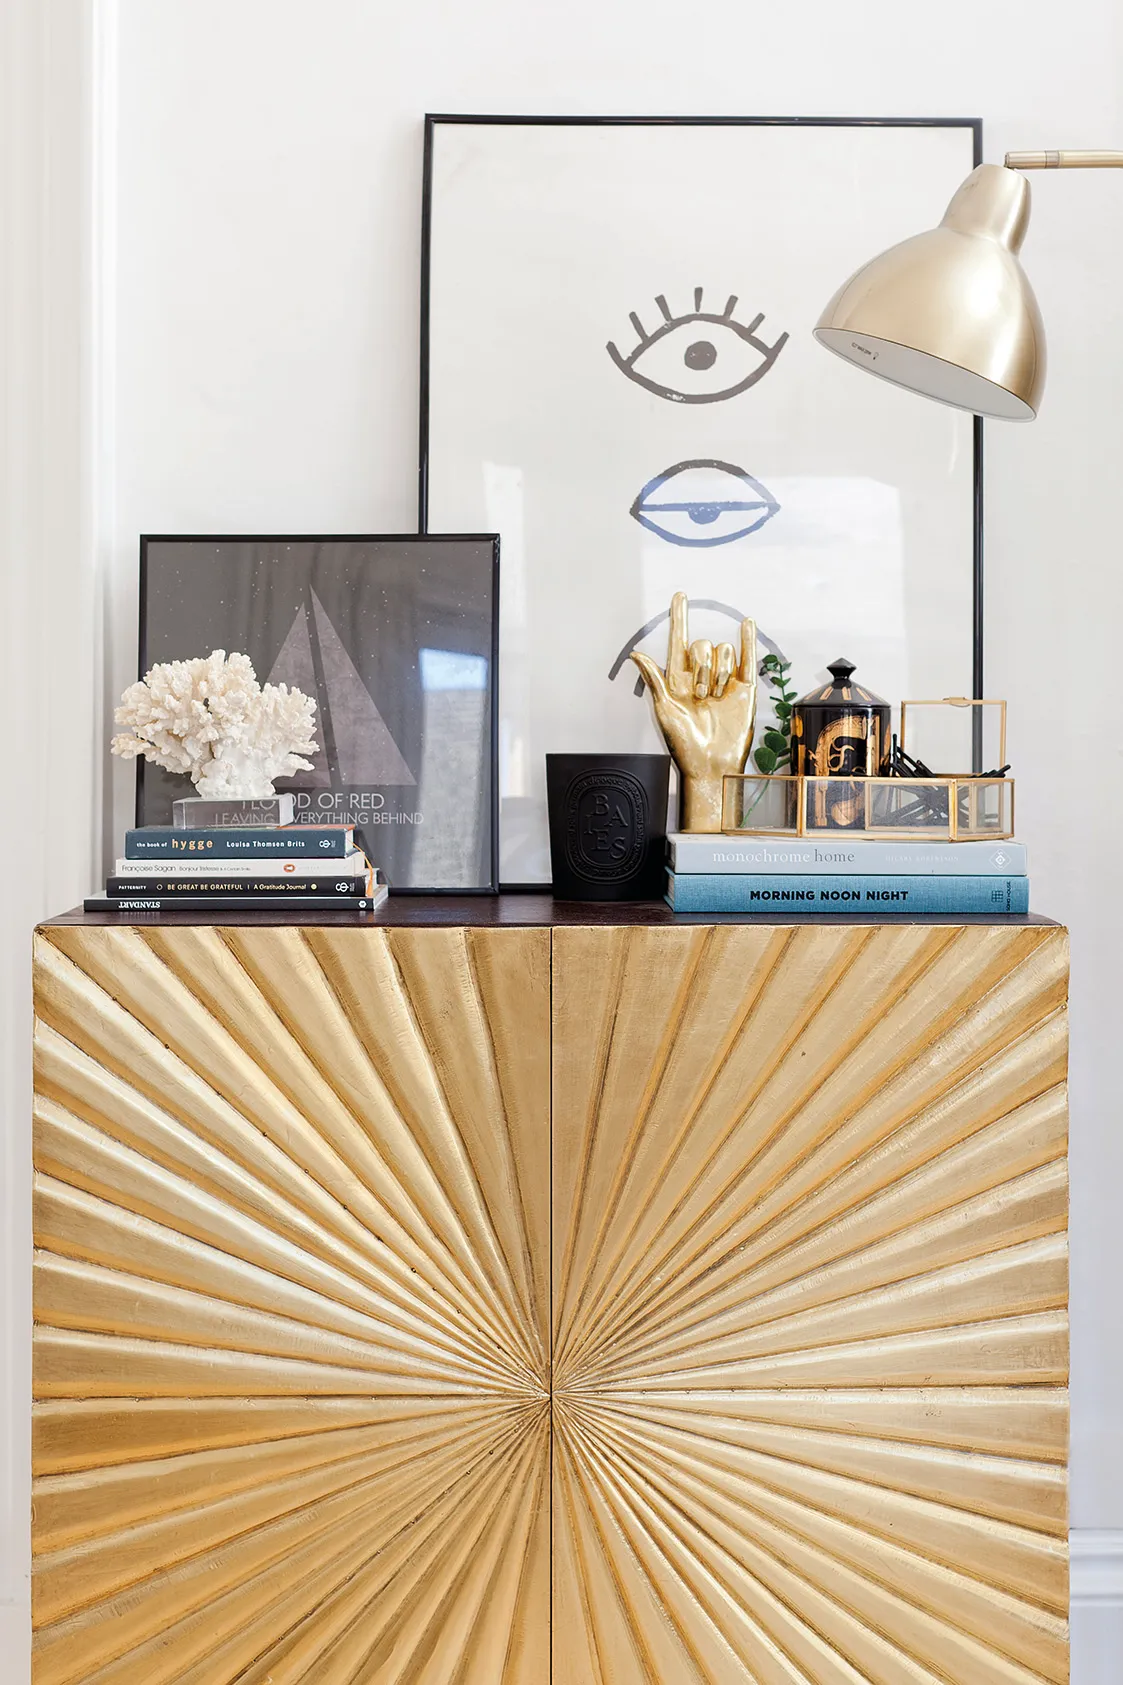 This striking gold and black sideboard from Swoon Editions gives the living room an instant shot of glam. Kate has styled it up with artwork from Society6, books and a collection of quirky accessories with gold and black accents to tie the look together